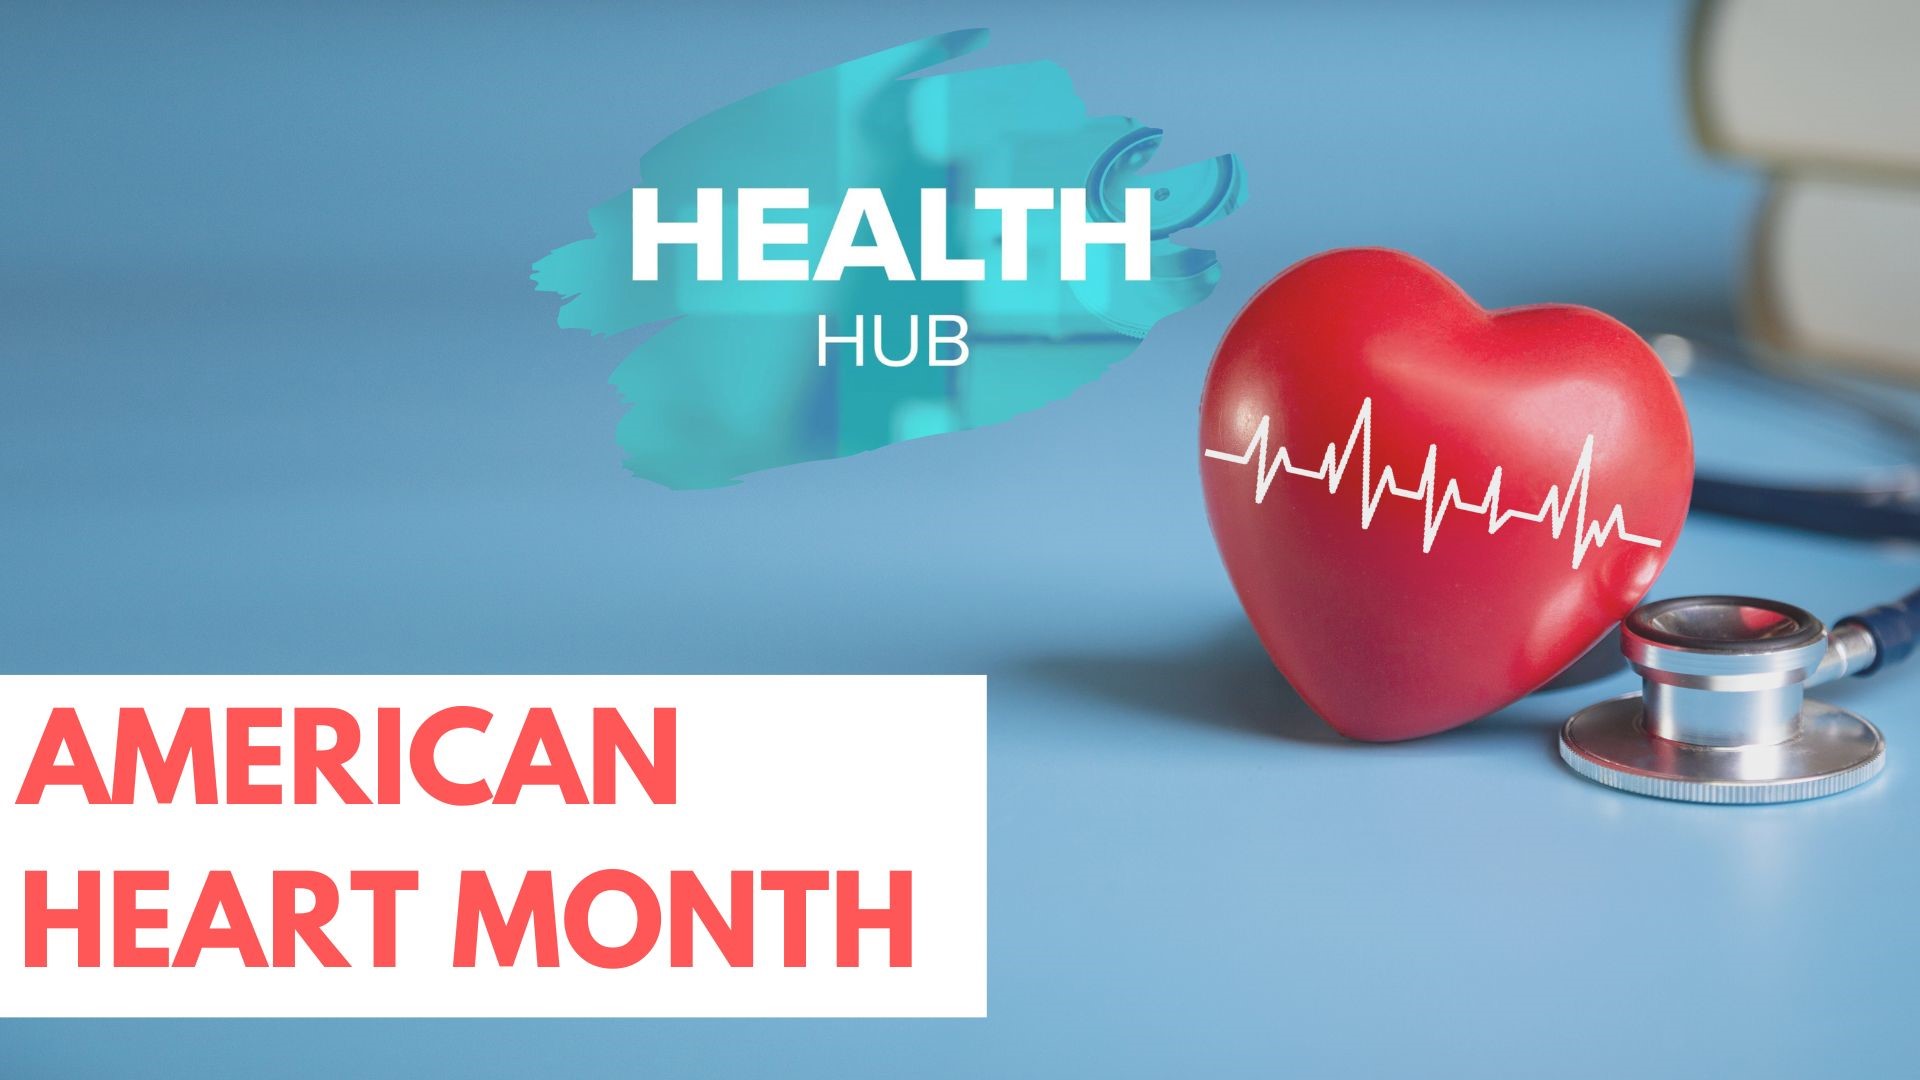 February is American Heart month. Experts and advocates share stories about improving heart health.